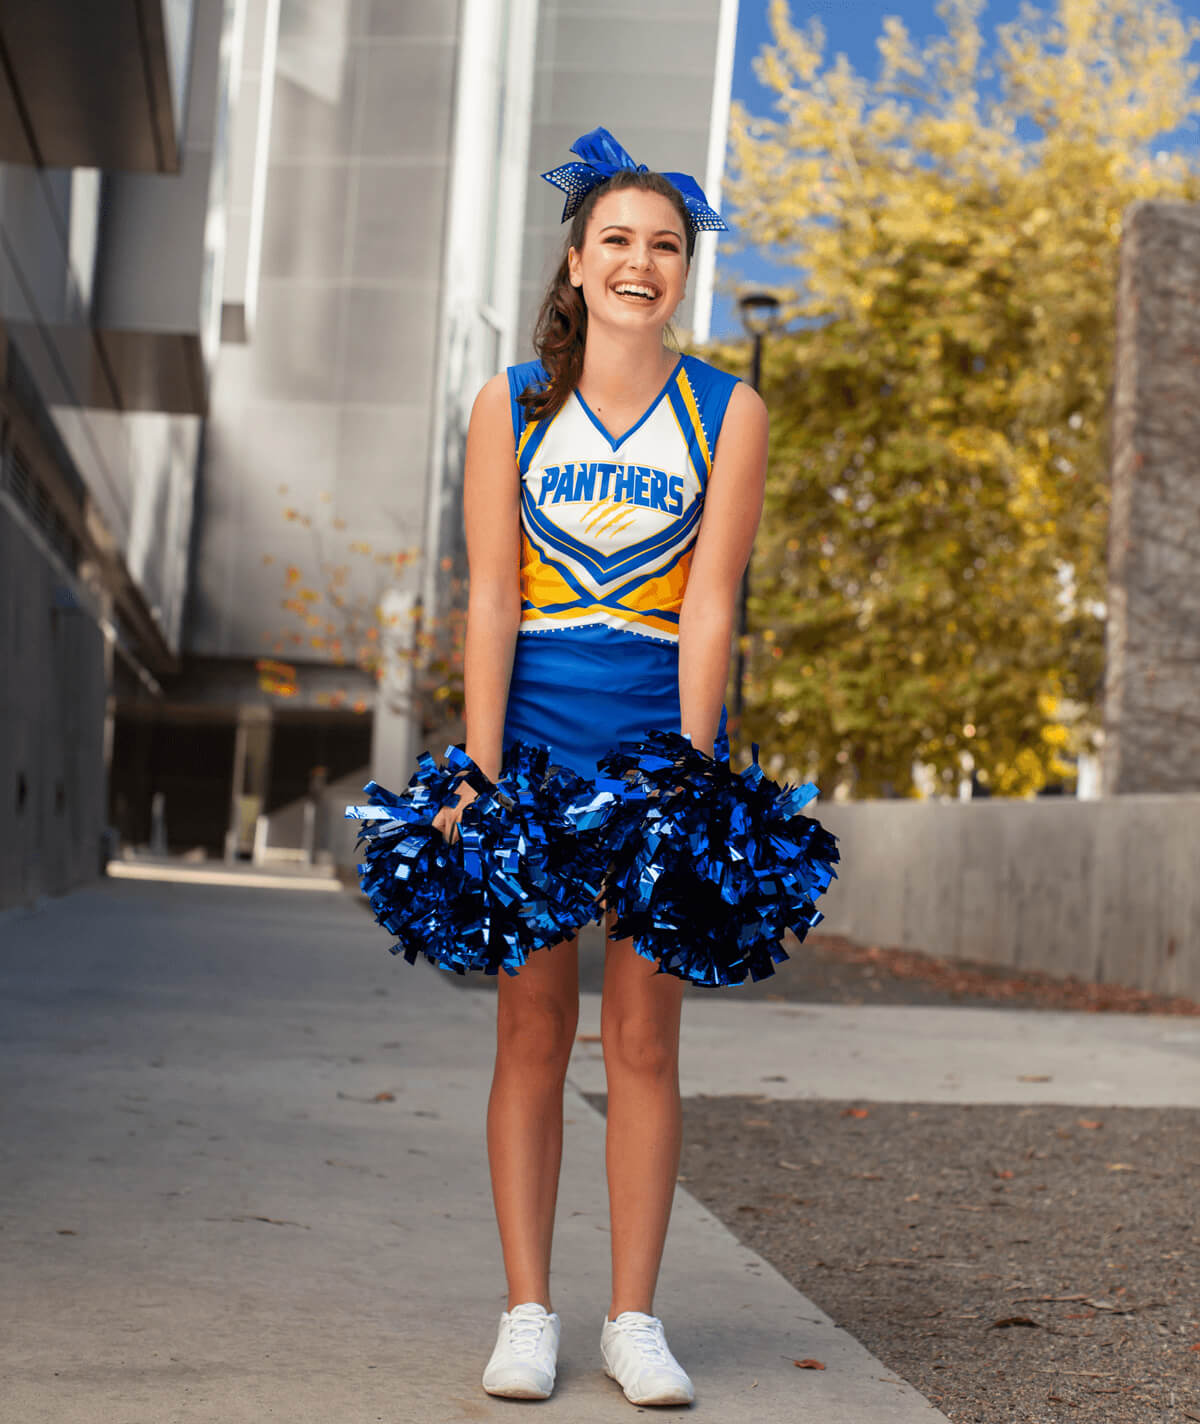 Custom Plastic Rooter Cheer Pom, High-quality cheerleading uniforms, cheer  shoes, cheer bows, cheer accessories, and more